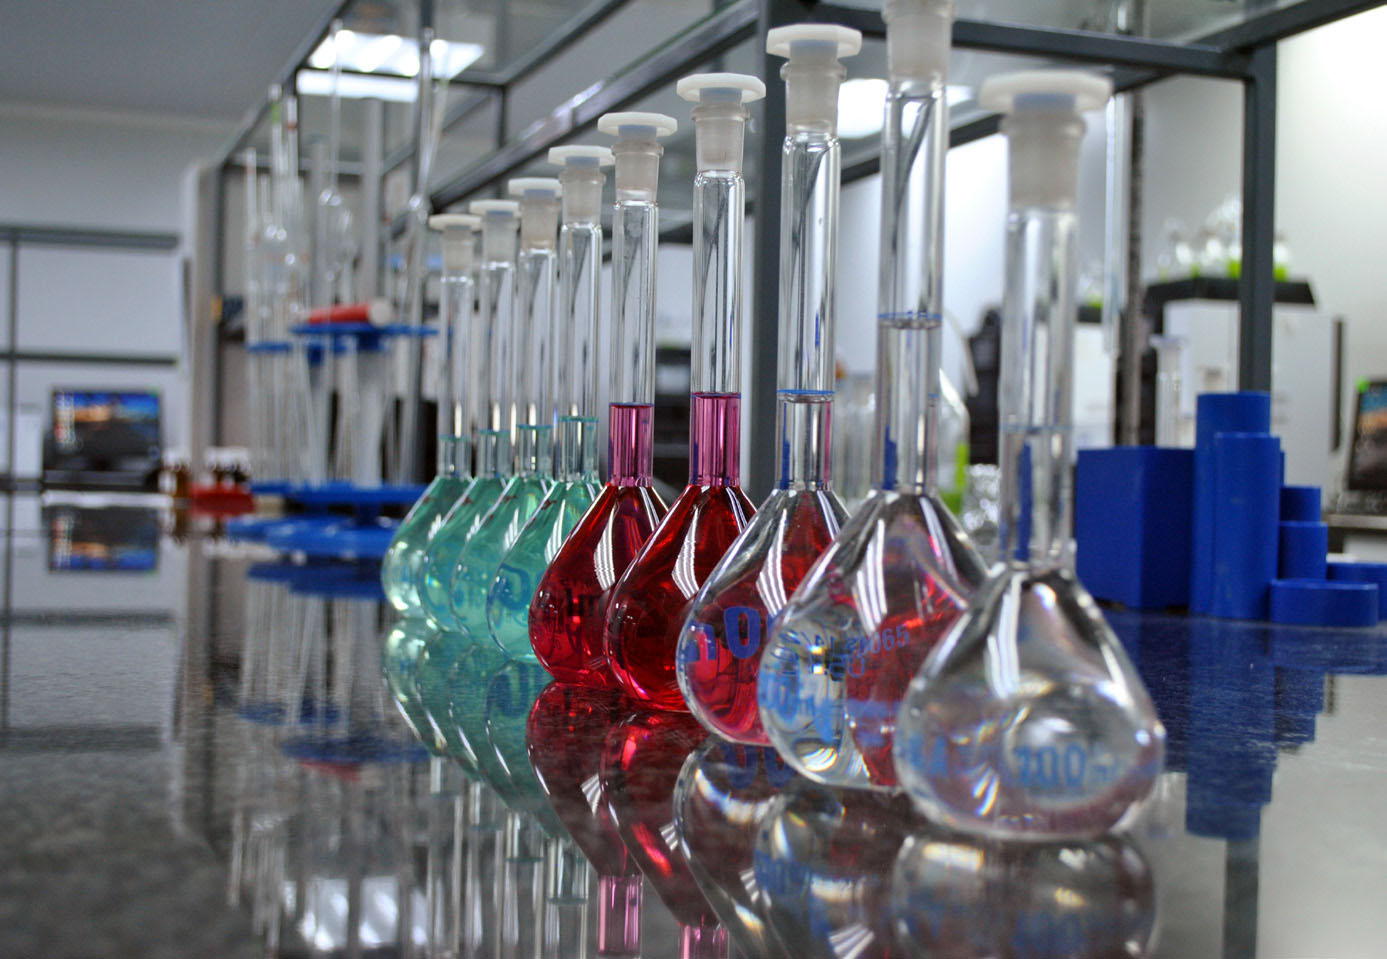 Wrapsa has a fully equipped laboratory to perform tests on pharmaceuticals and CAMs products